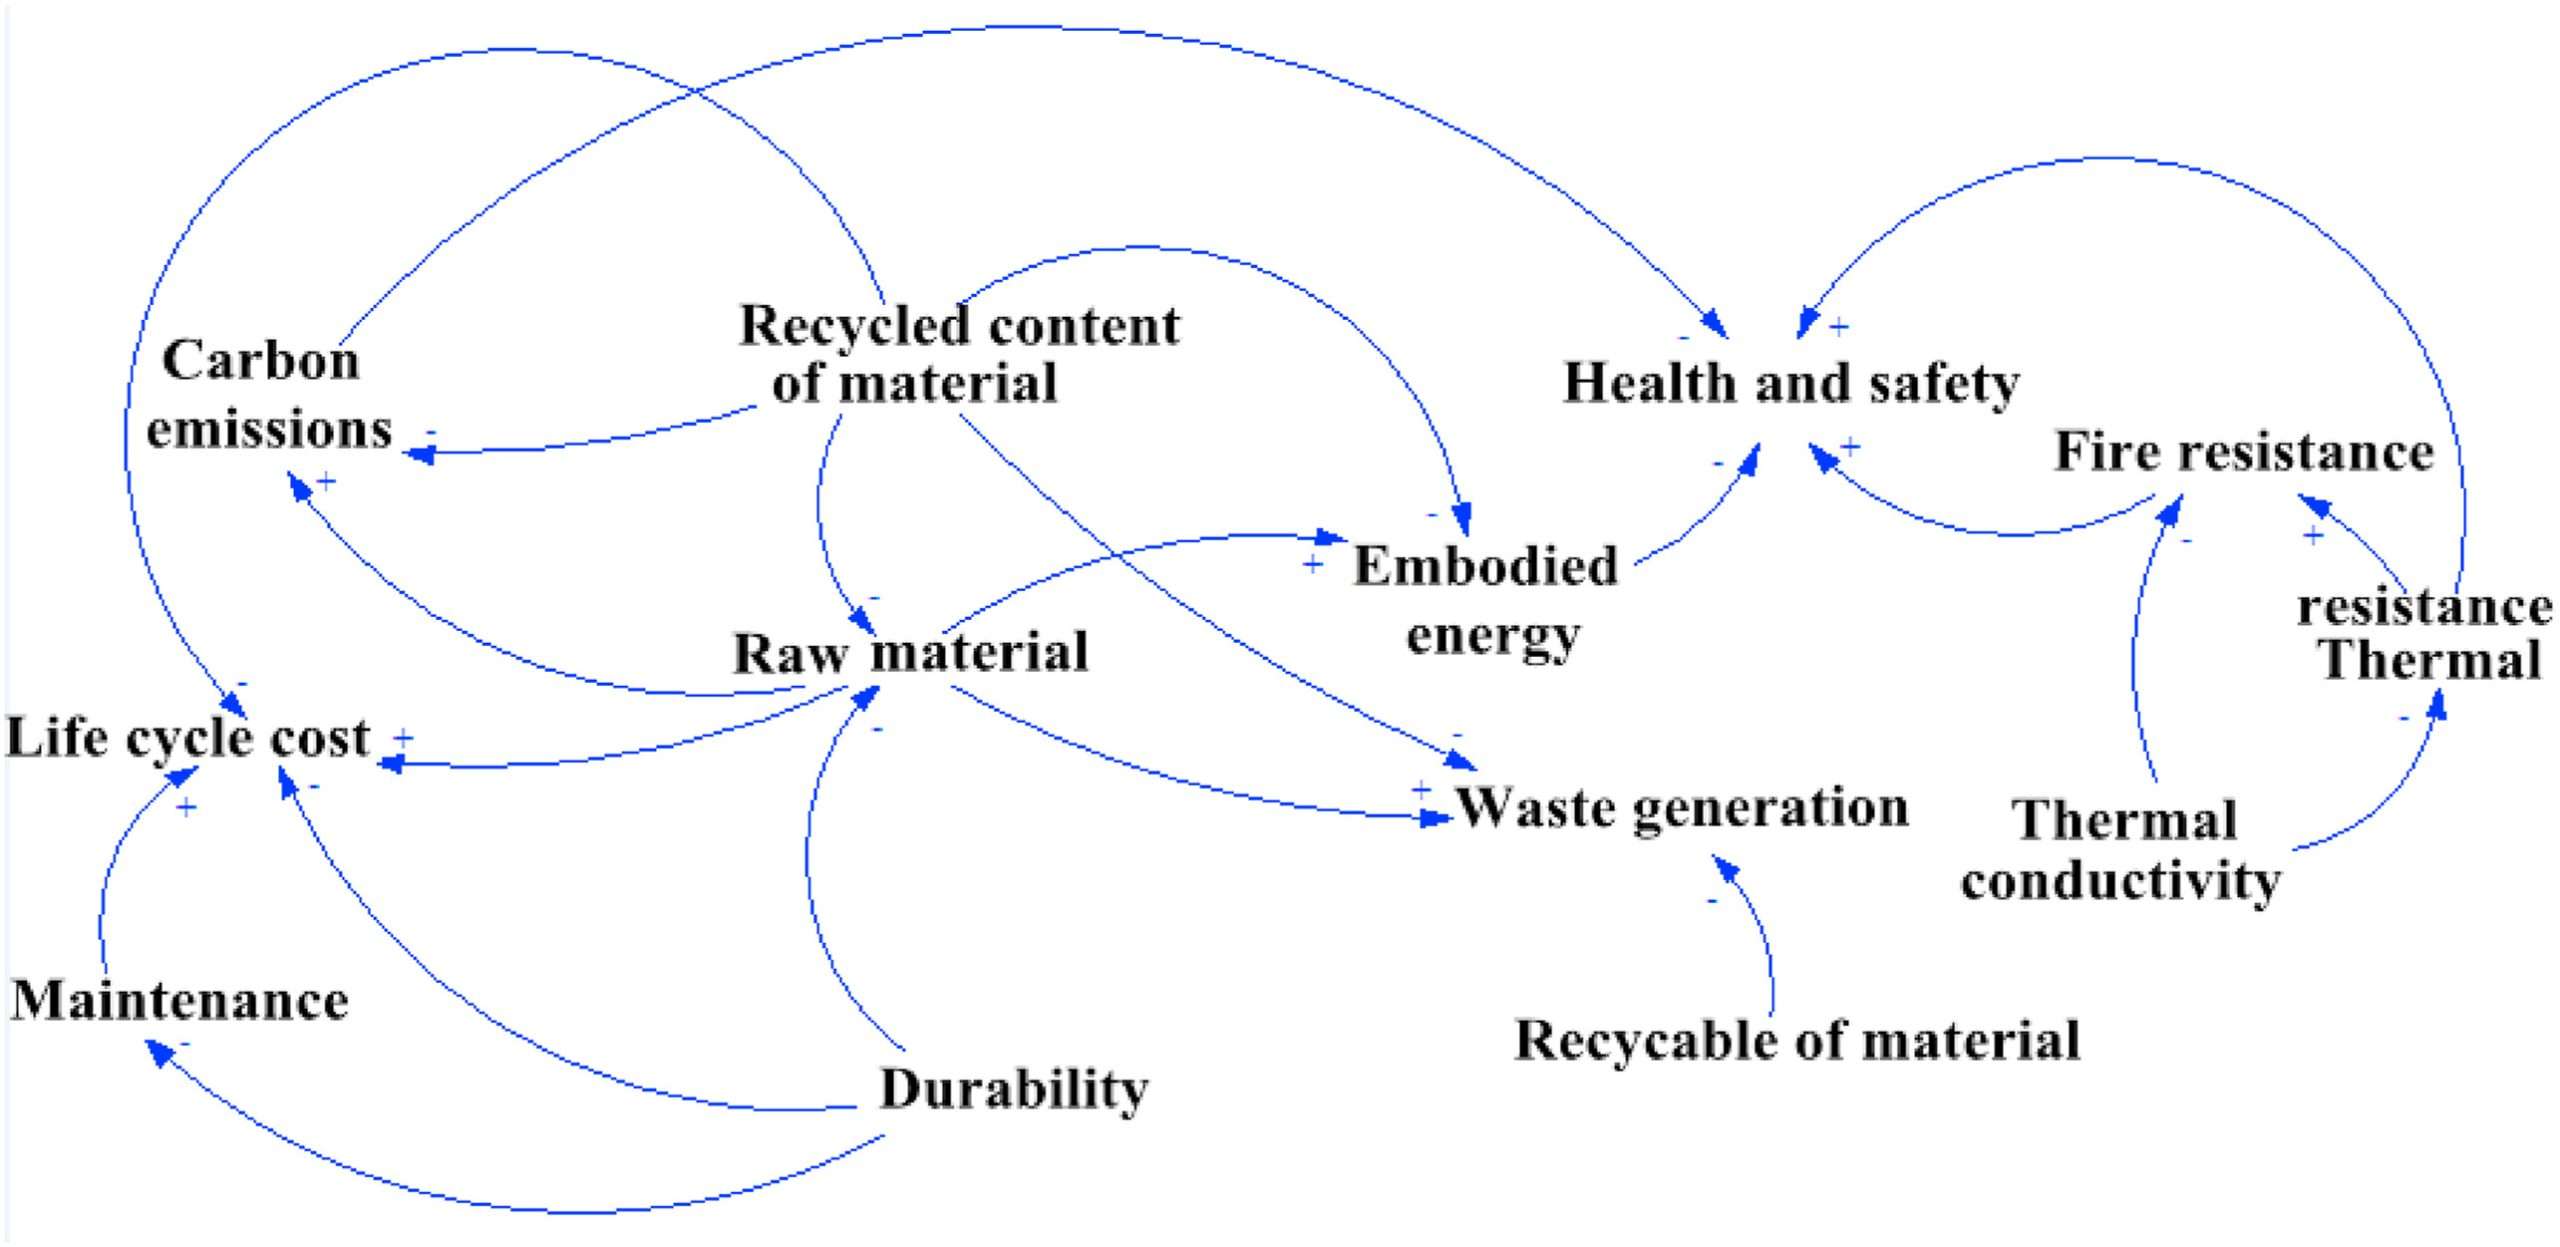 A causal loop diagram of the factors affecting sustainable building materials selection.